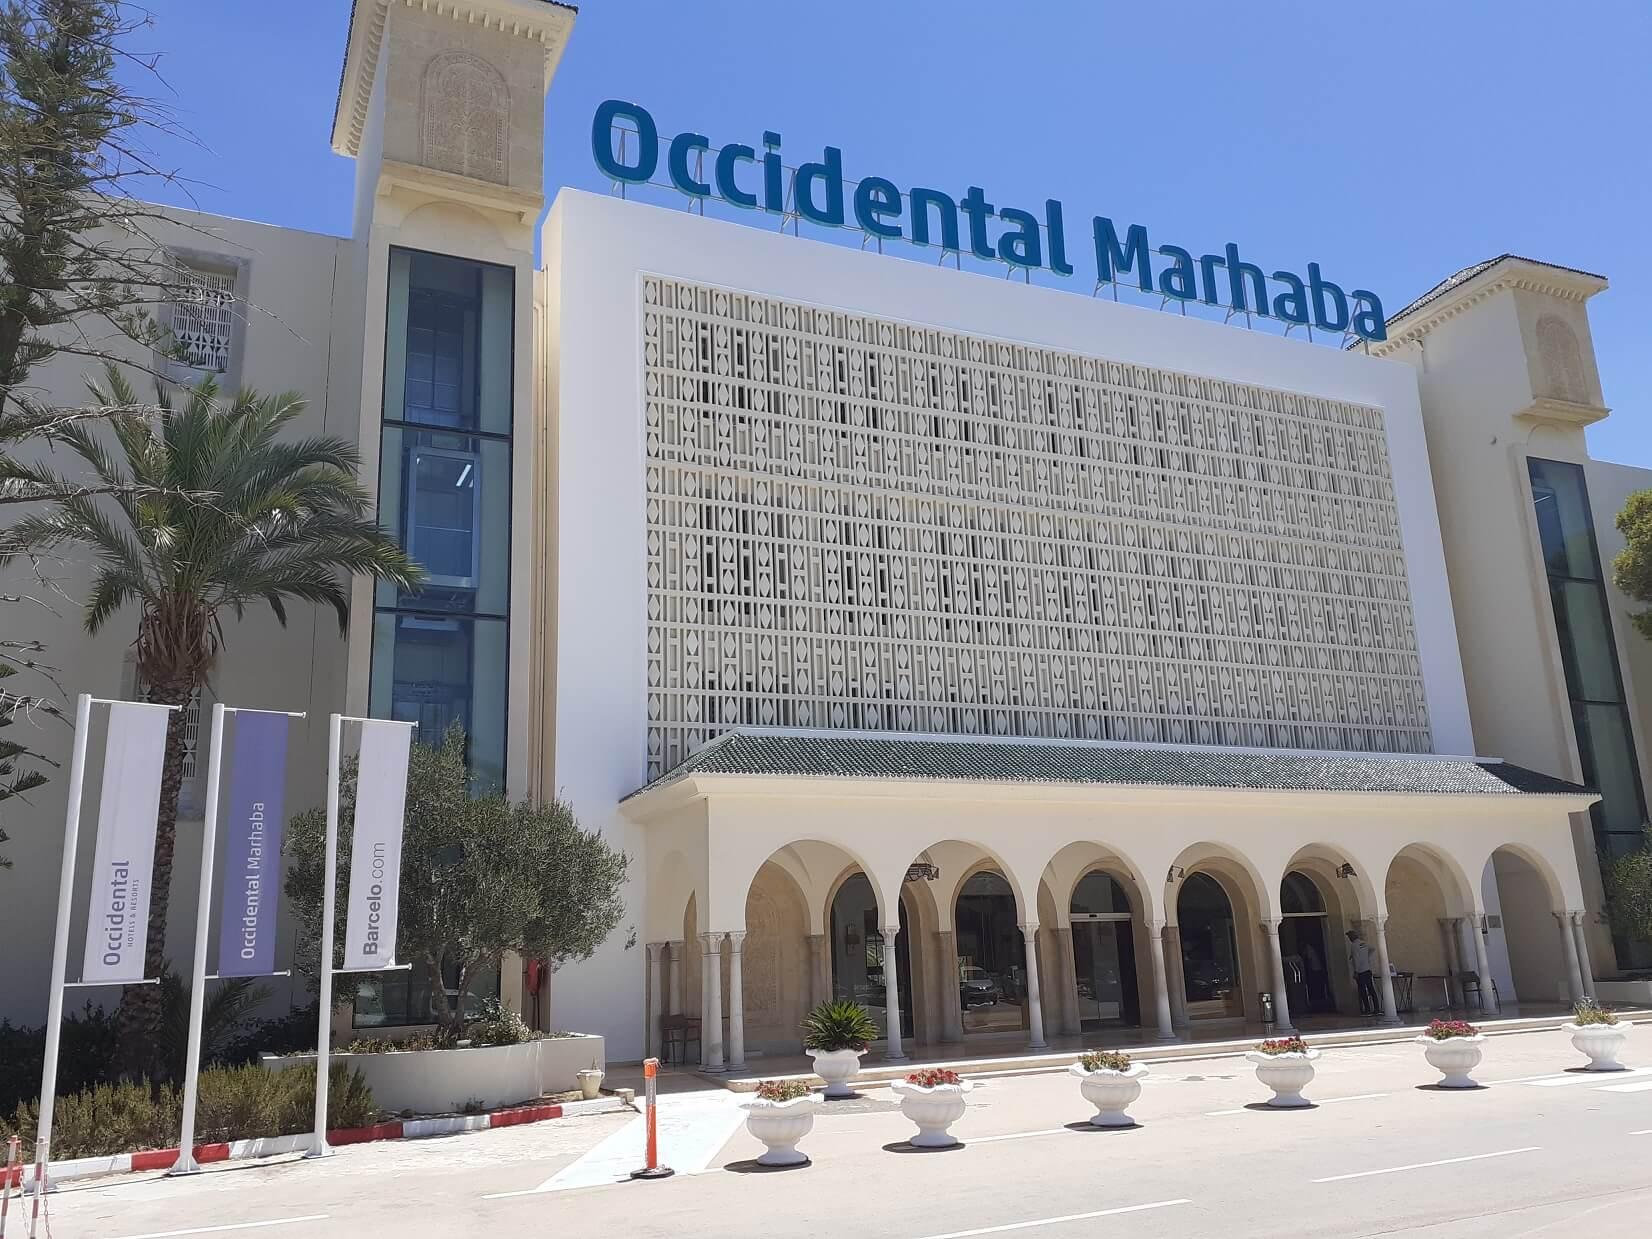 Discover Occidental Sousse Marhaba on attenvo